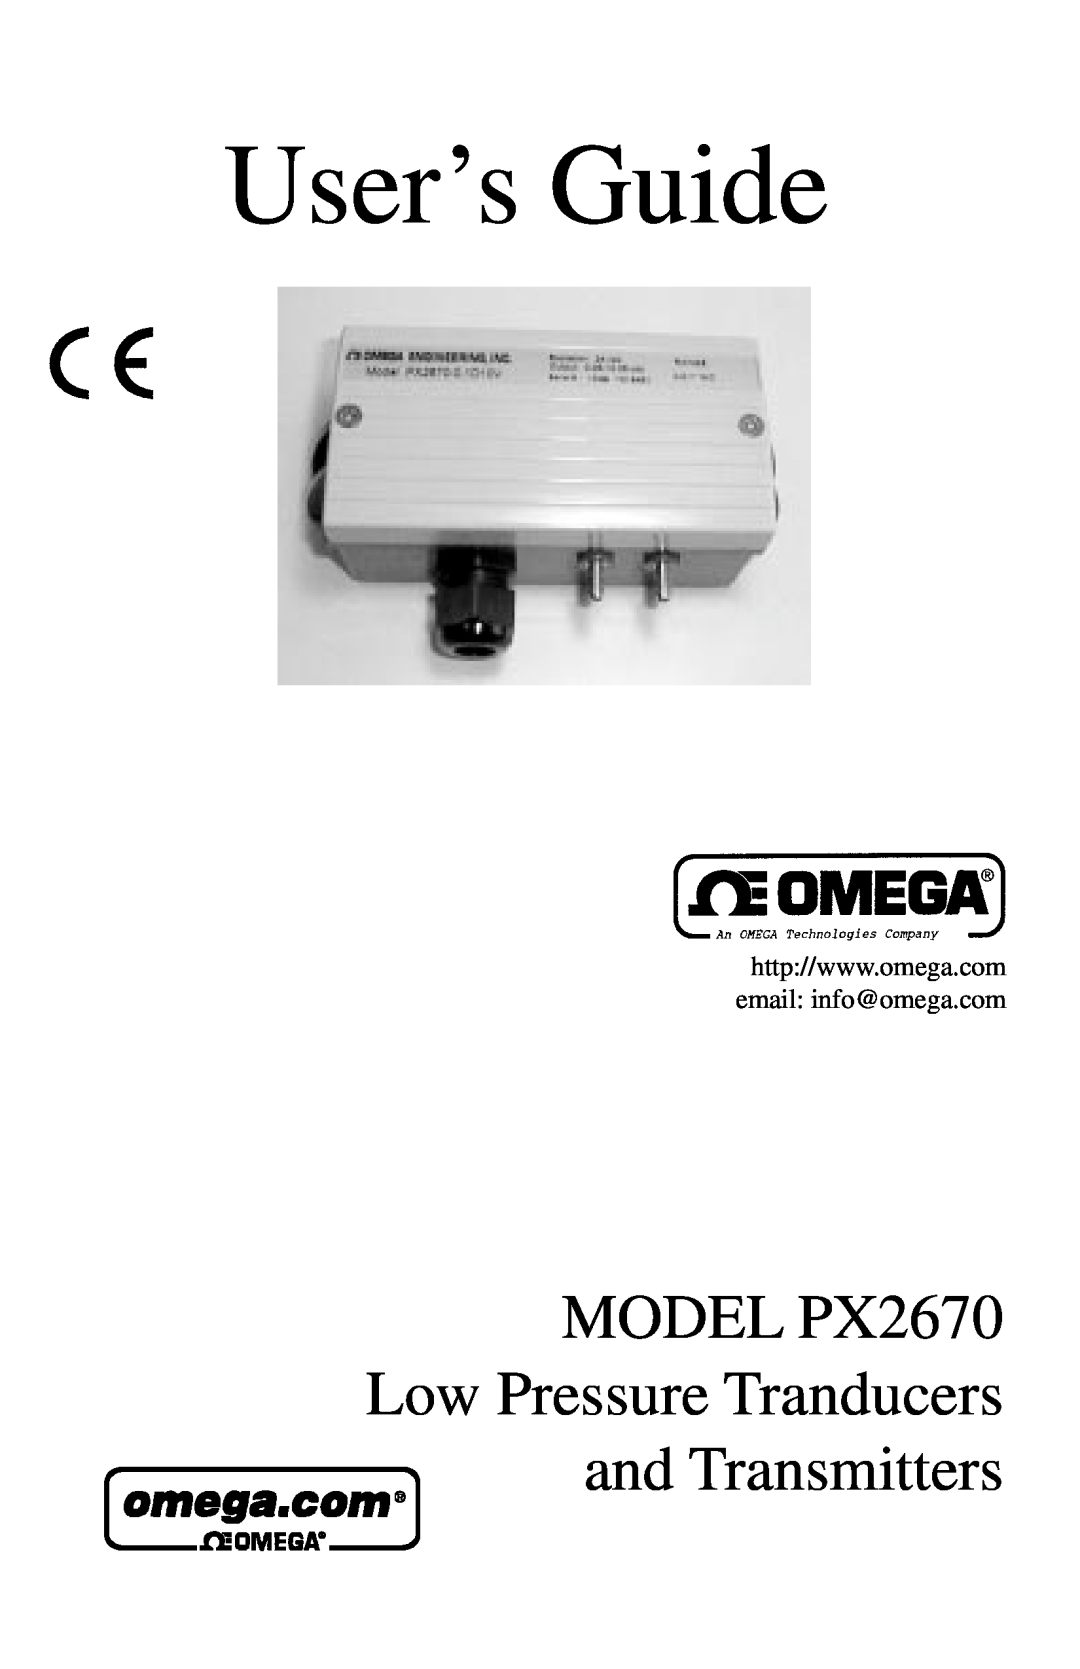 Omega Engineering manual User’s Guide, MODEL PX2670 Low Pressure Tranducers, and Transmitters 